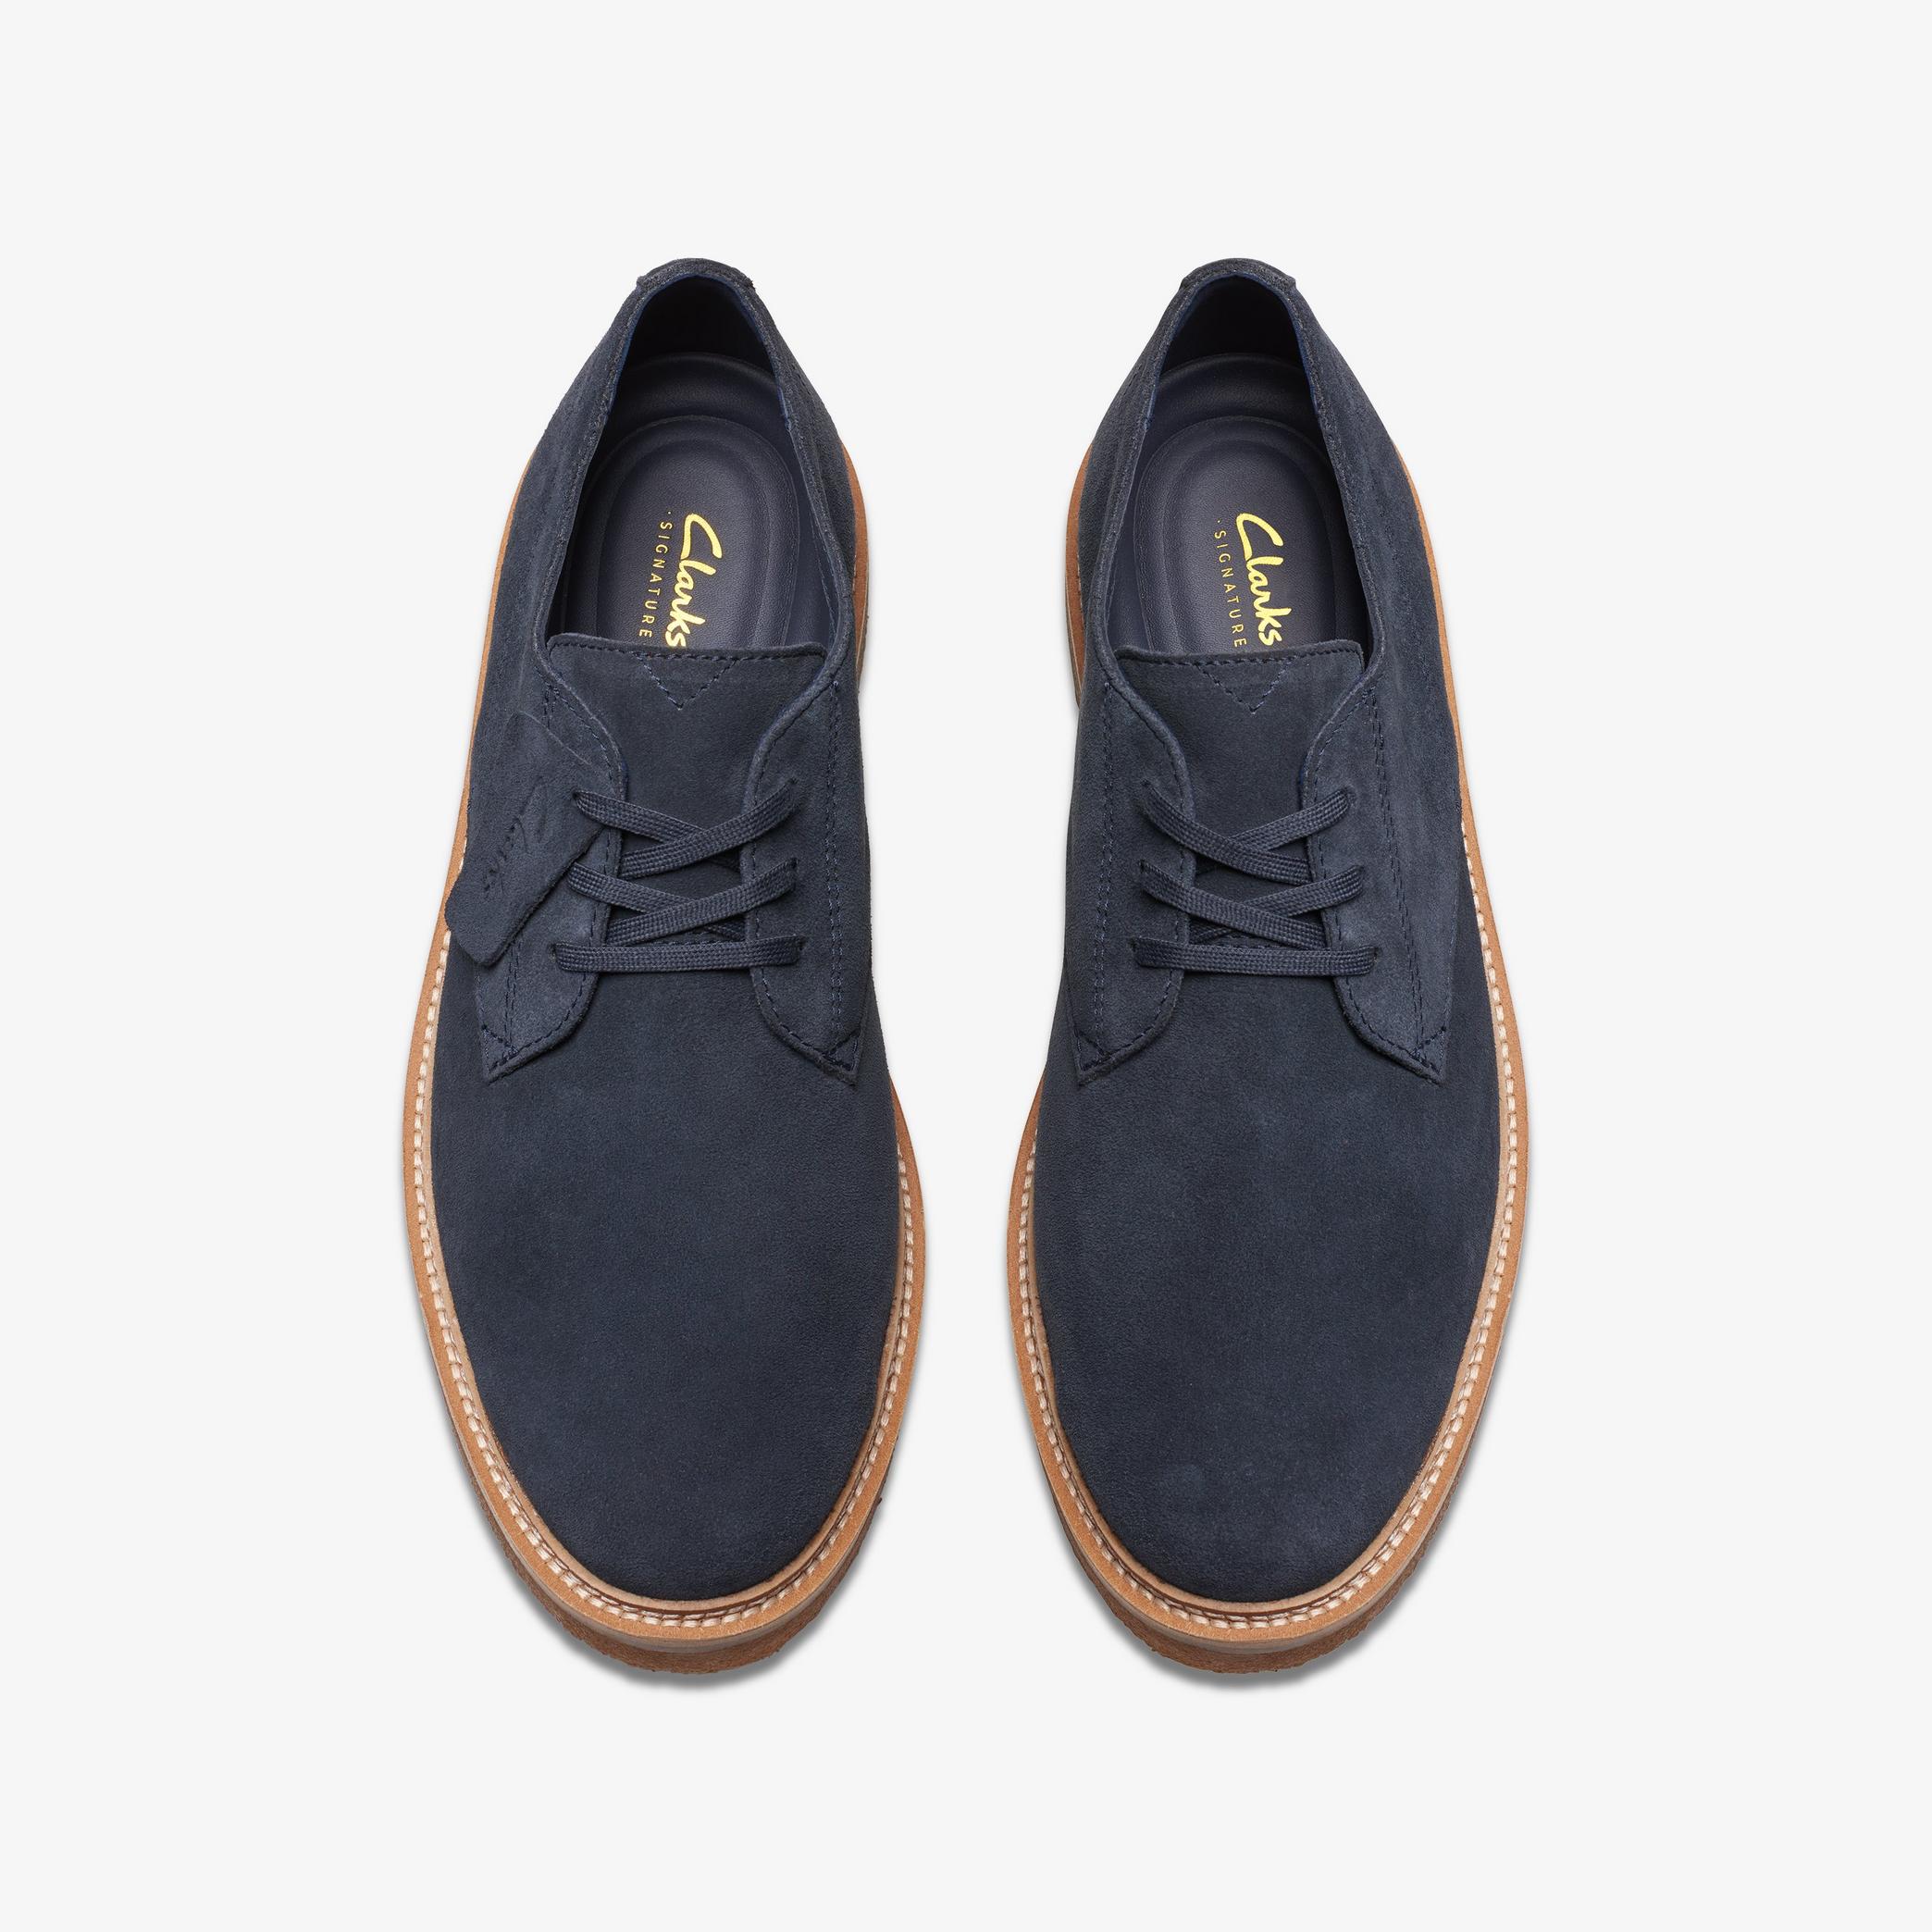 Clarkdale Derby Navy Suede Oxford Shoes, view 6 of 6